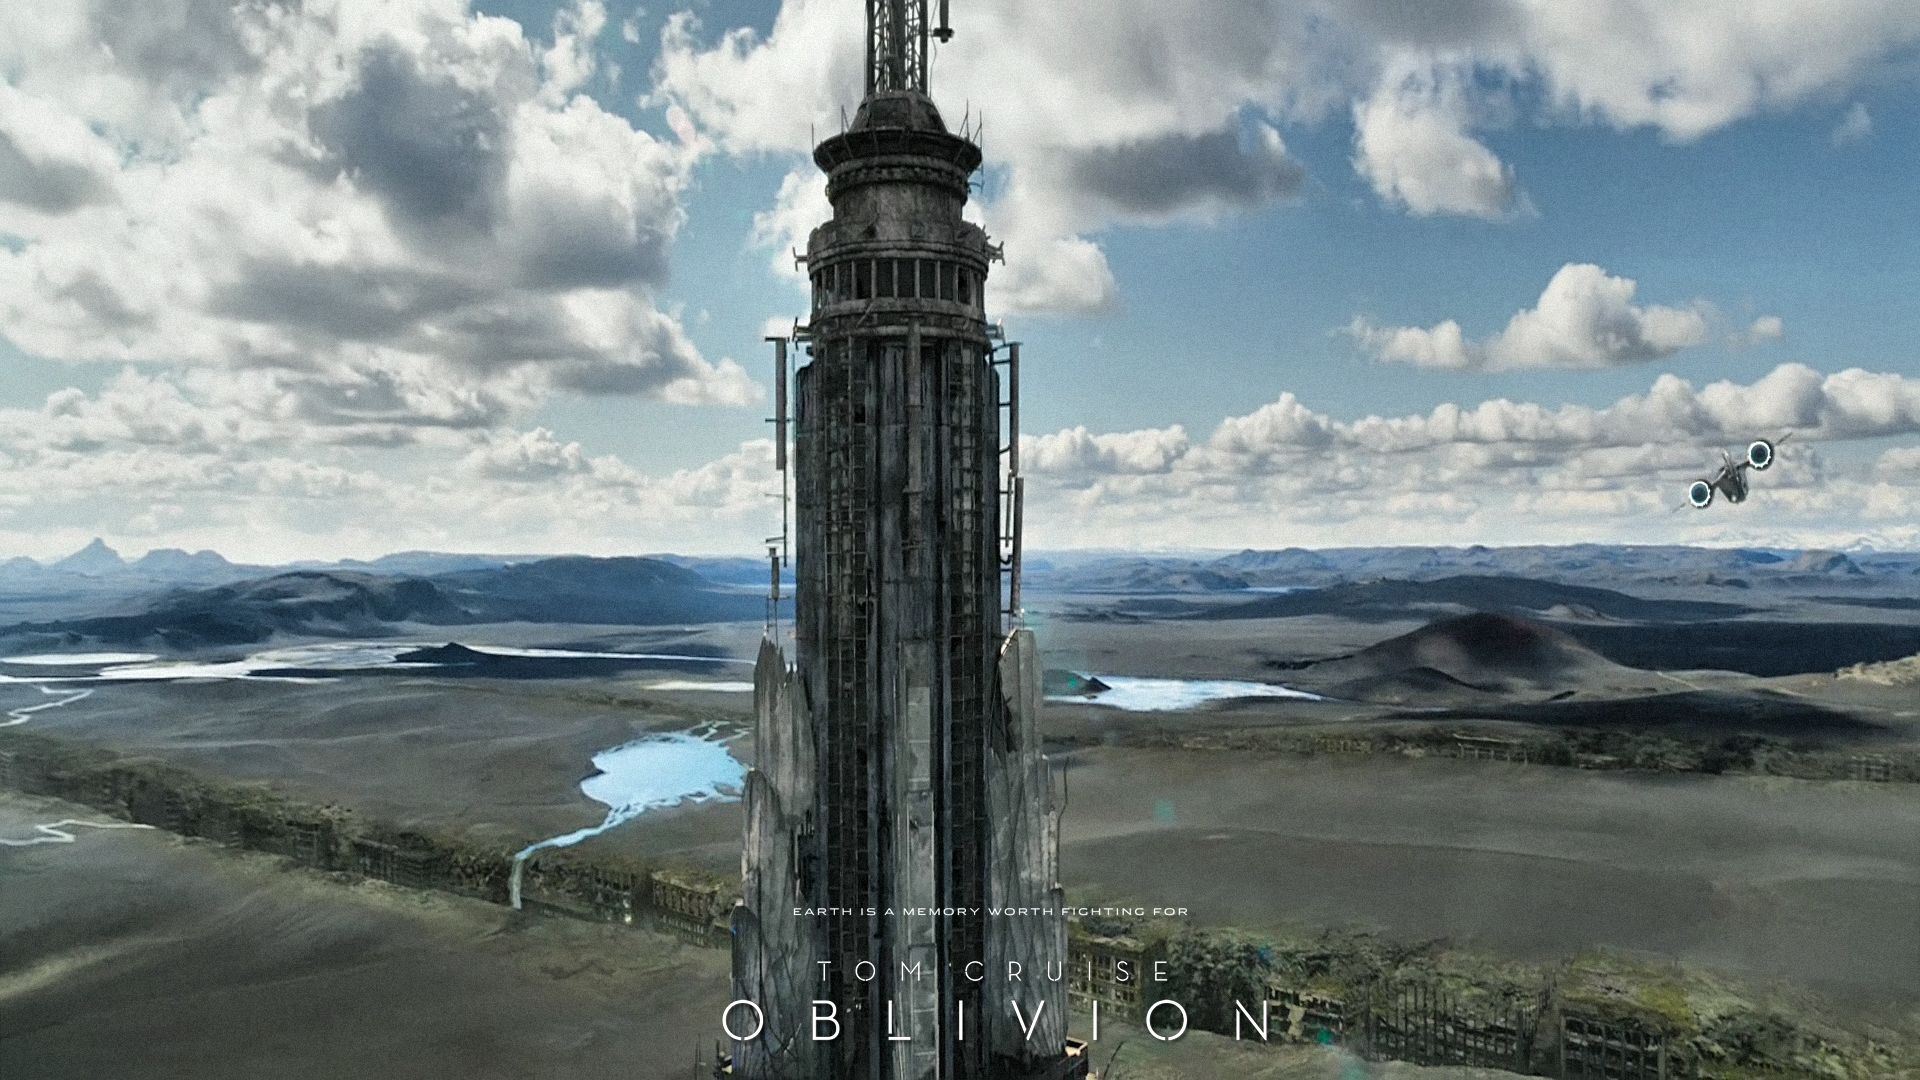 Free download 20 HD wallpapercreenshots of Oblivion with Tom Cruise Movie [1920x1080] for your Desktop, Mobile & Tablet. Explore Tom Cruise Oblivion Wallpaper. Tom Cruise Oblivion Wallpaper, Tom Cruise